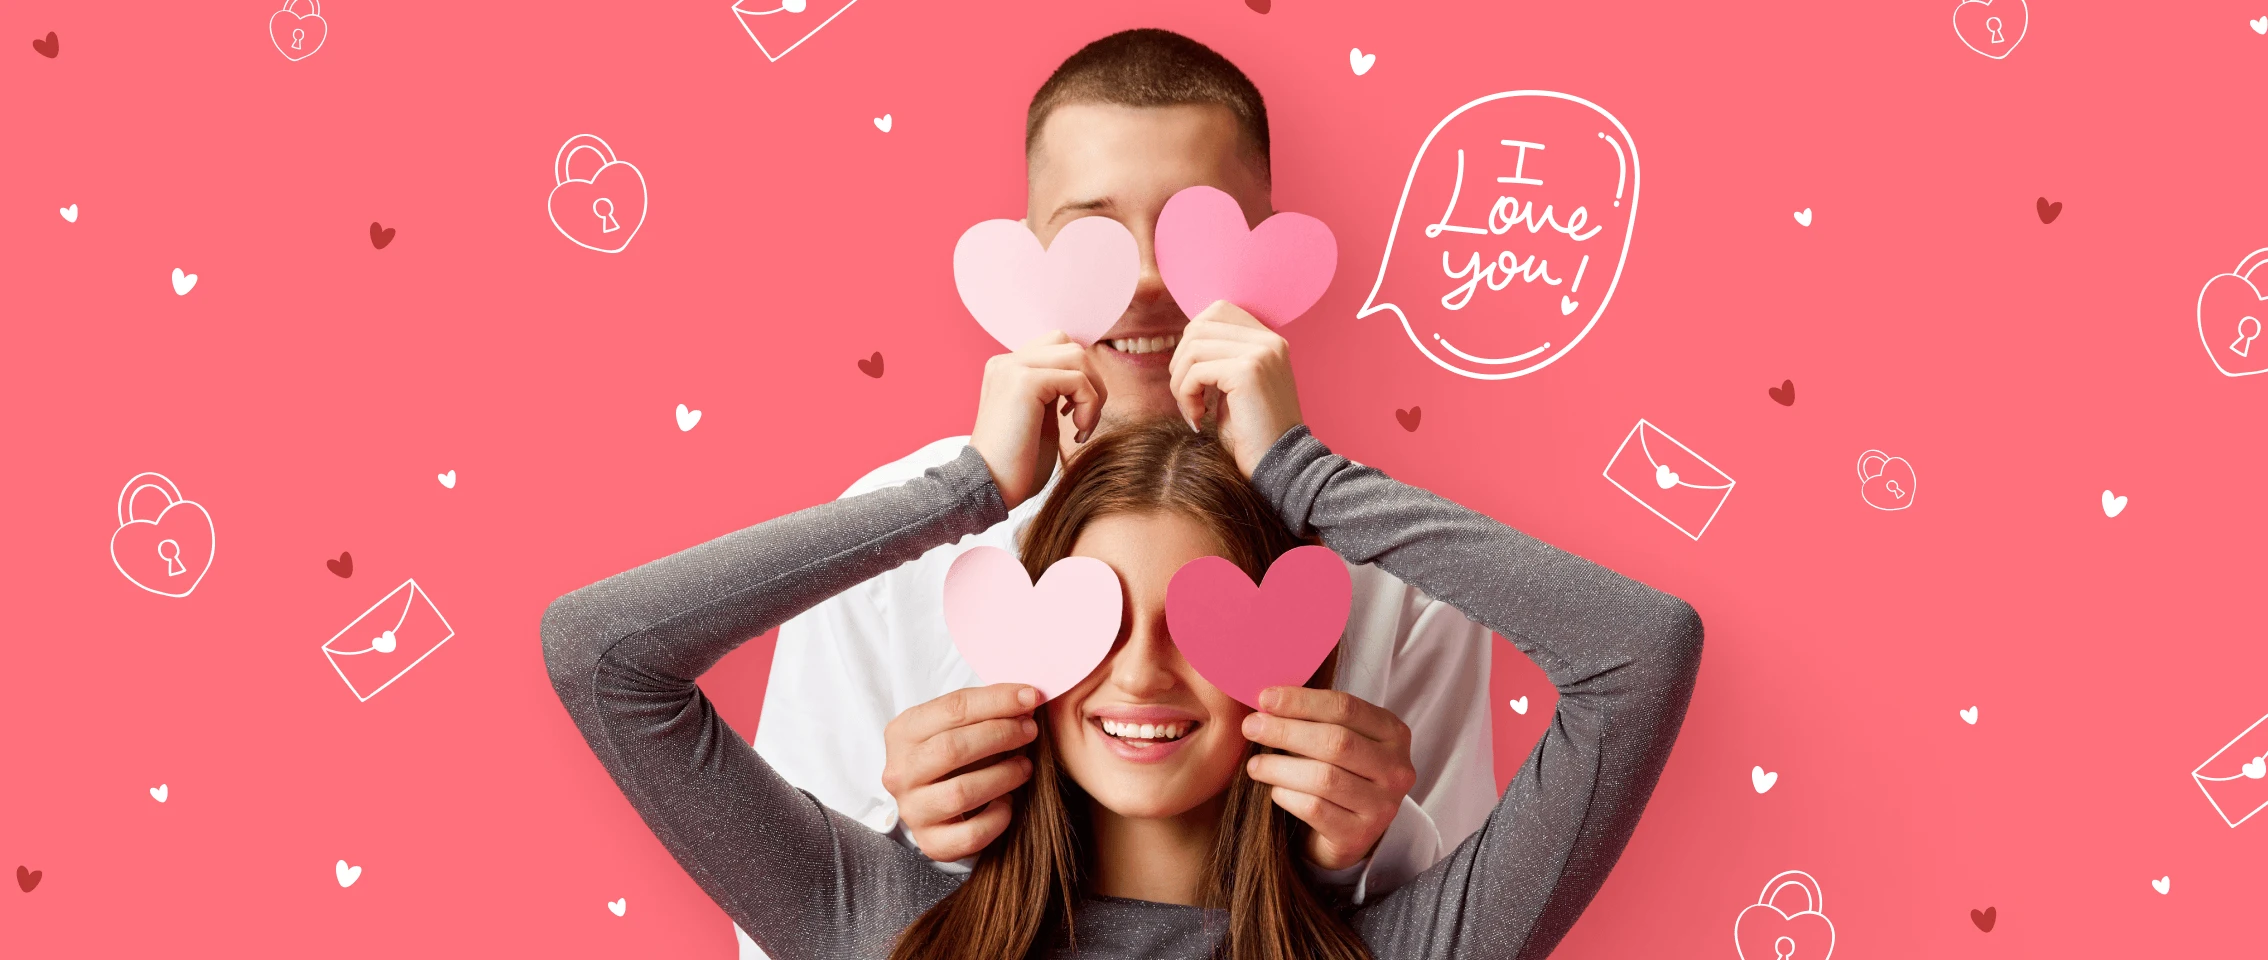 Showing love with Profee: our customers’ stories